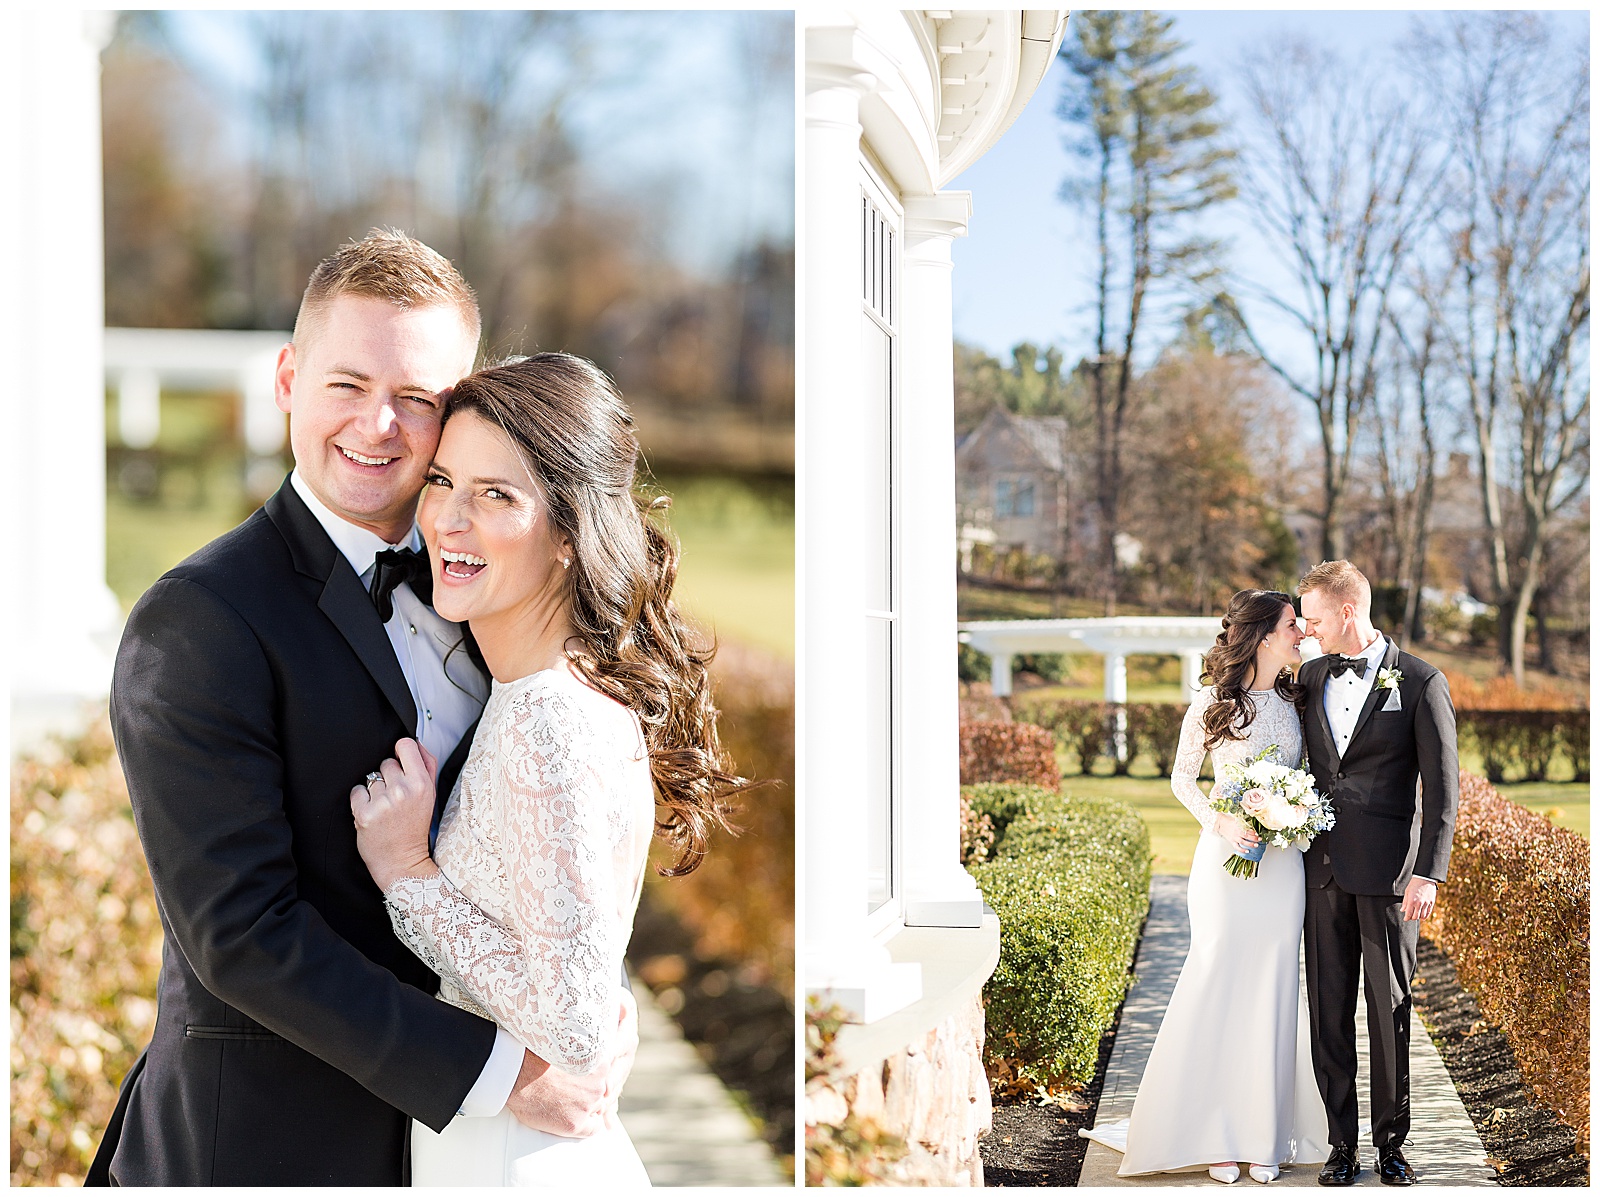 First Look wedding portraits of bride and groom at Brae Burn Country Club